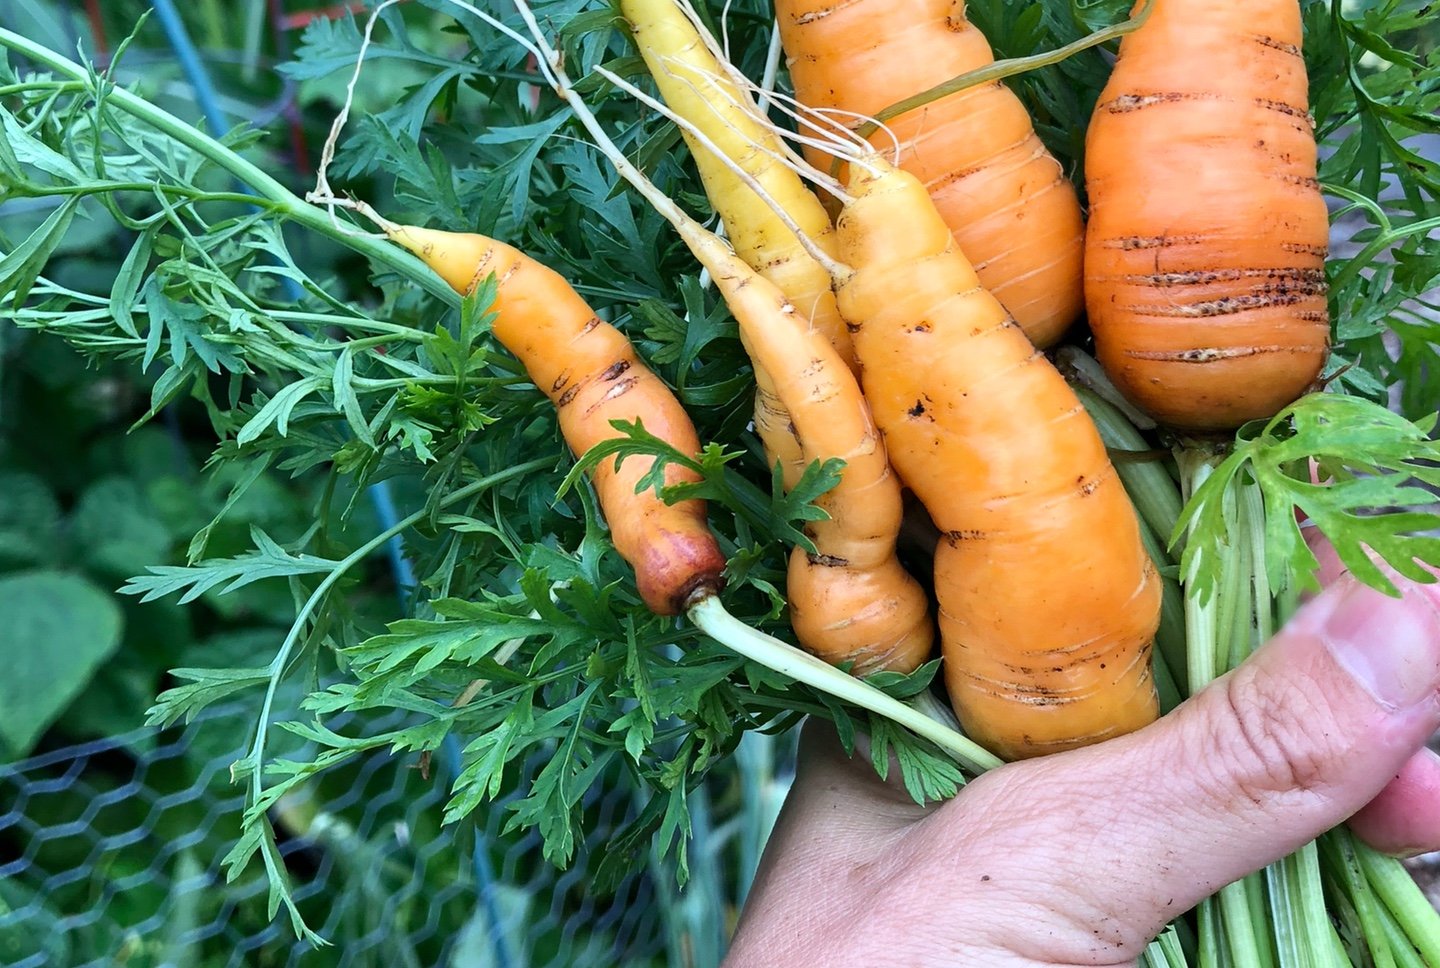 Carrots can be grown easily from seed, provided you can find seeds. (Patty Wetli / WTTW)